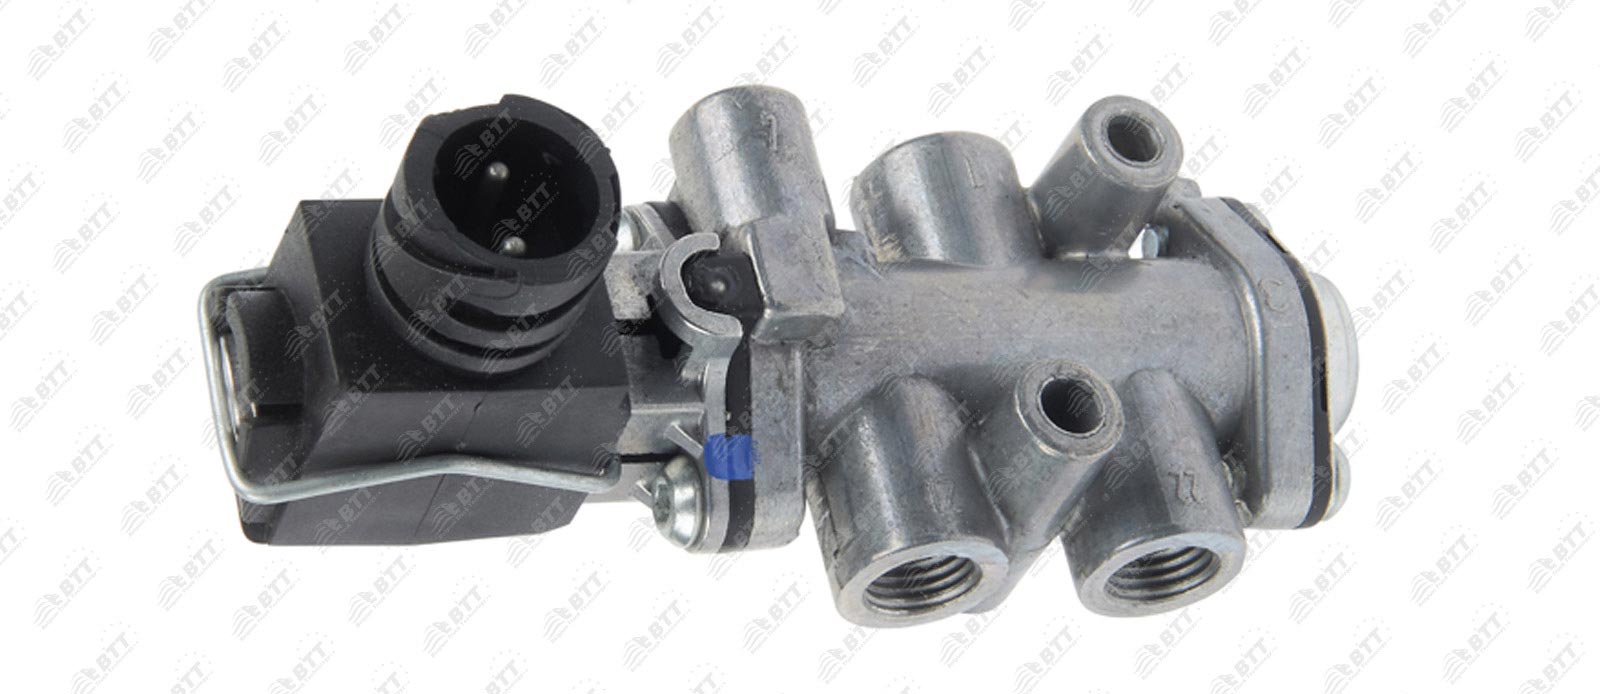 1457276 - Gearbox valves replacement